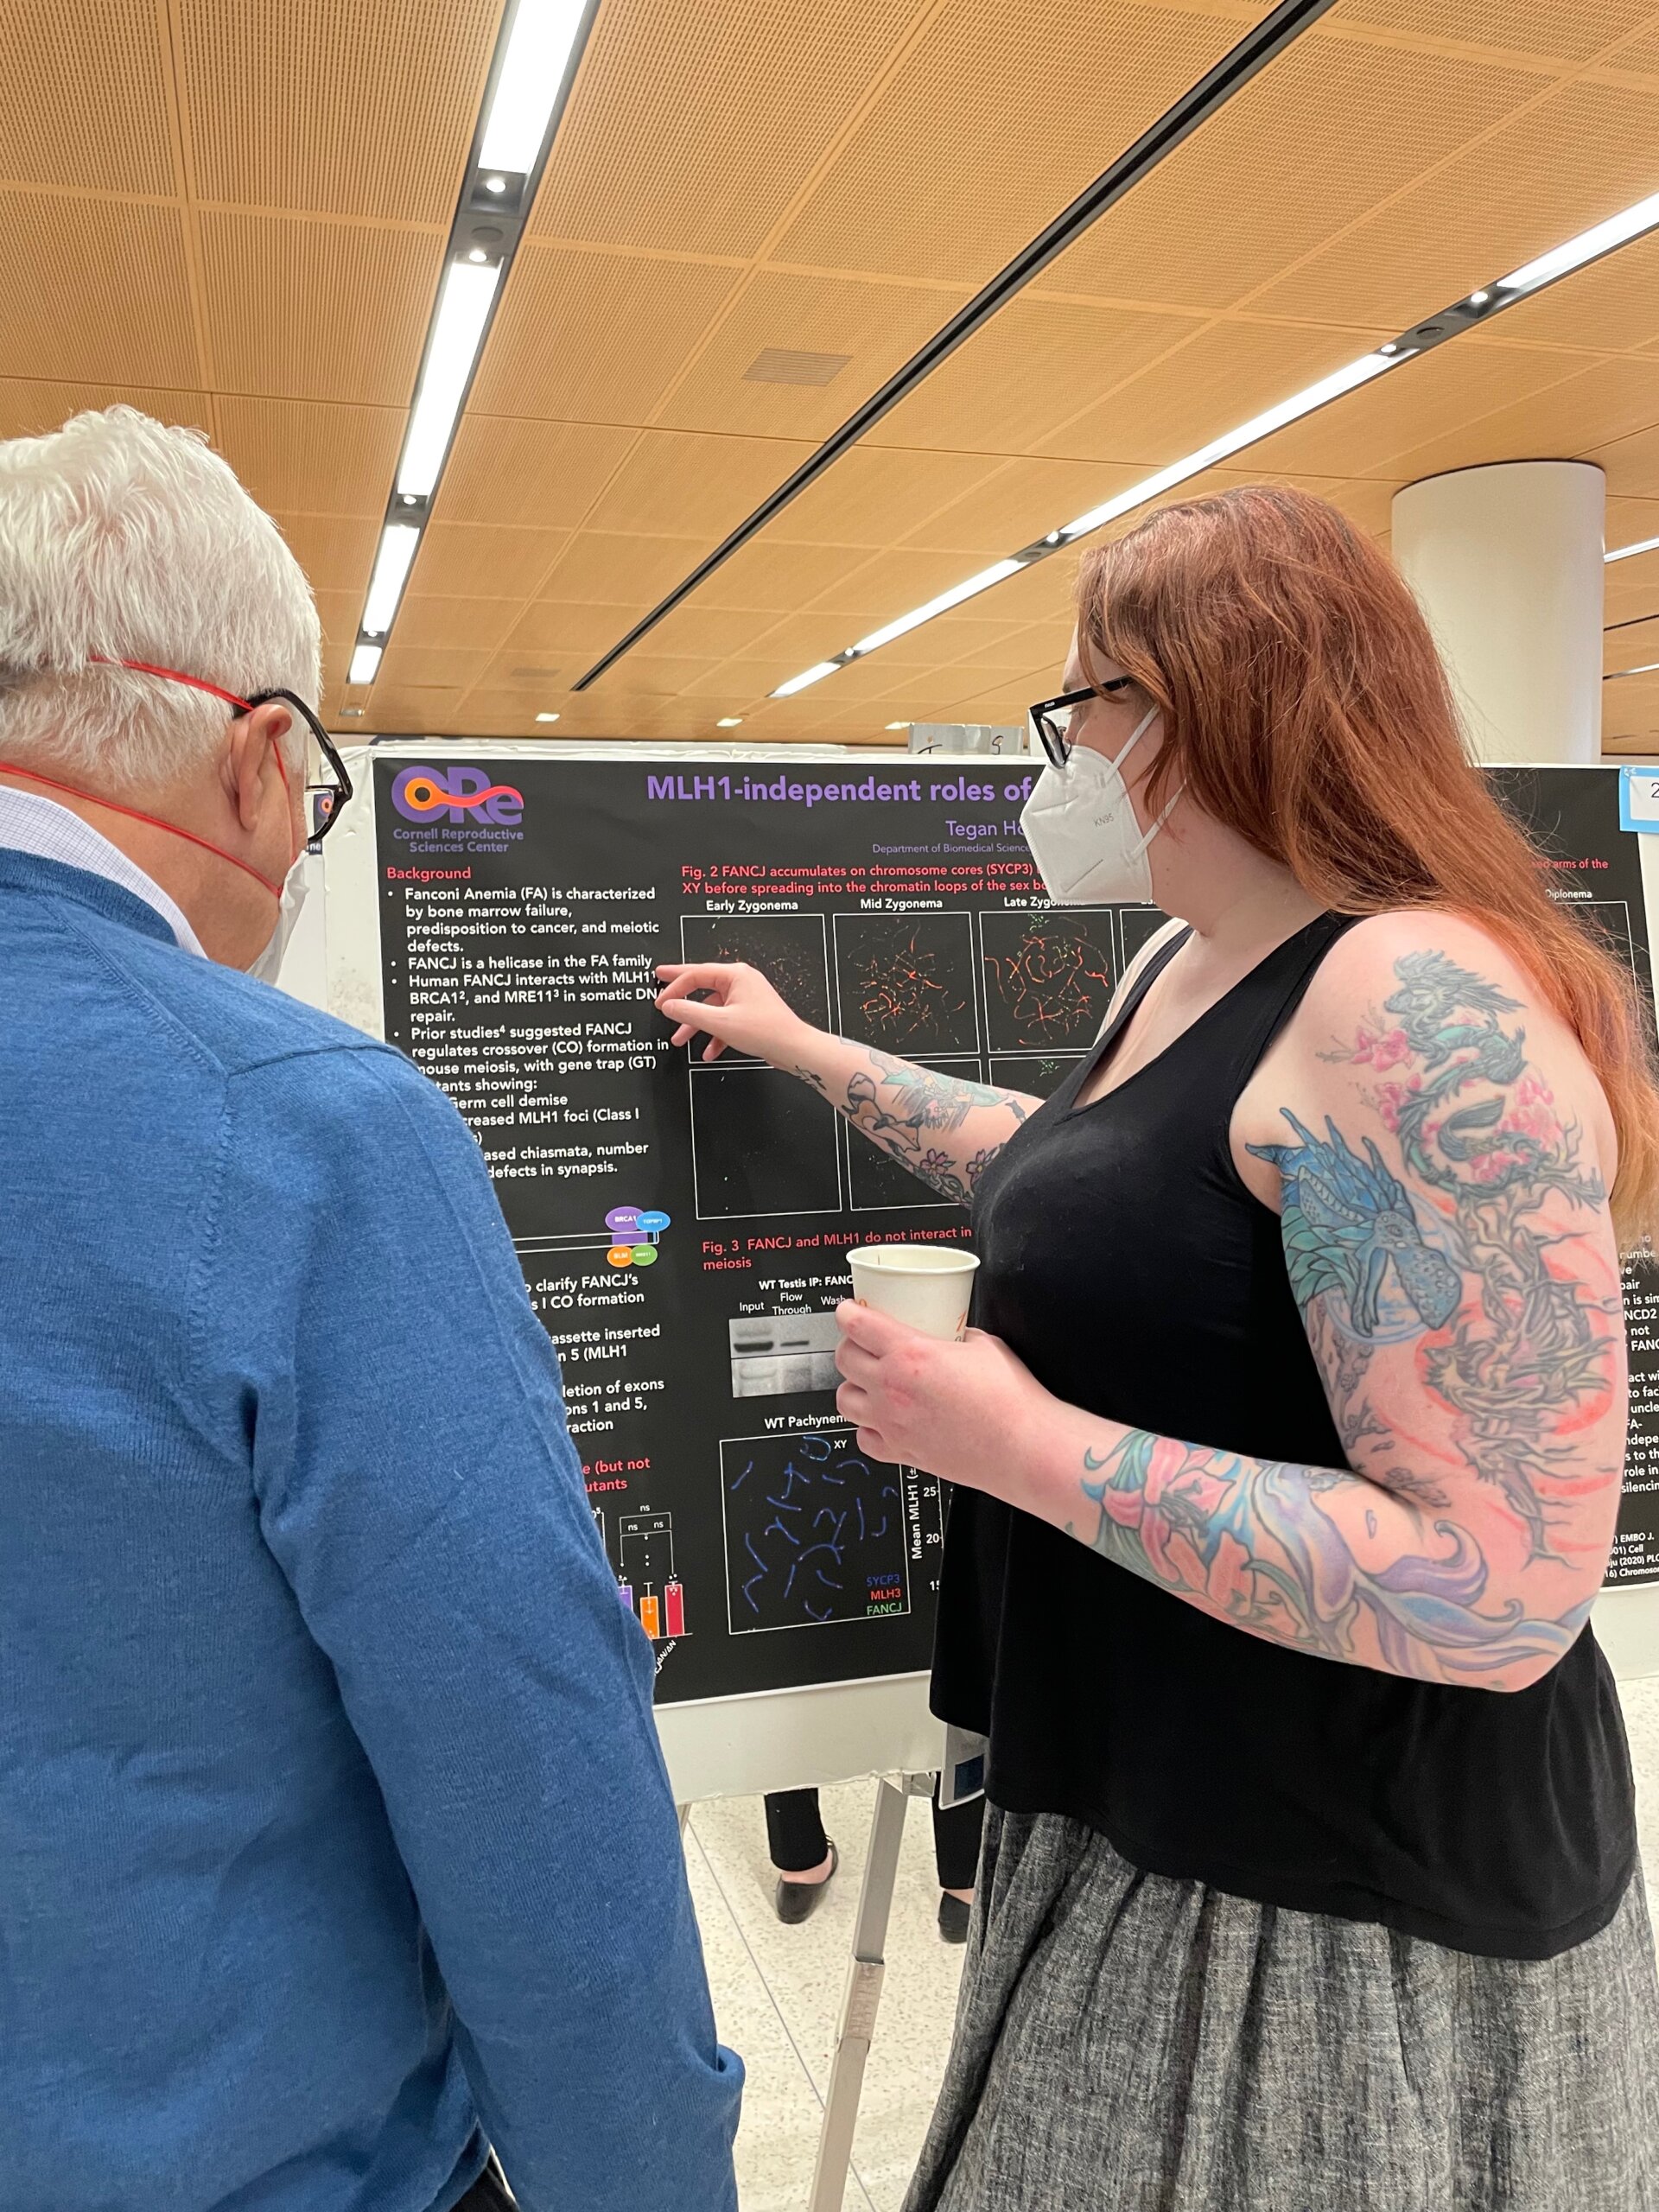 Dr. Tegan Horan and an attendee discussing a scientific poster display